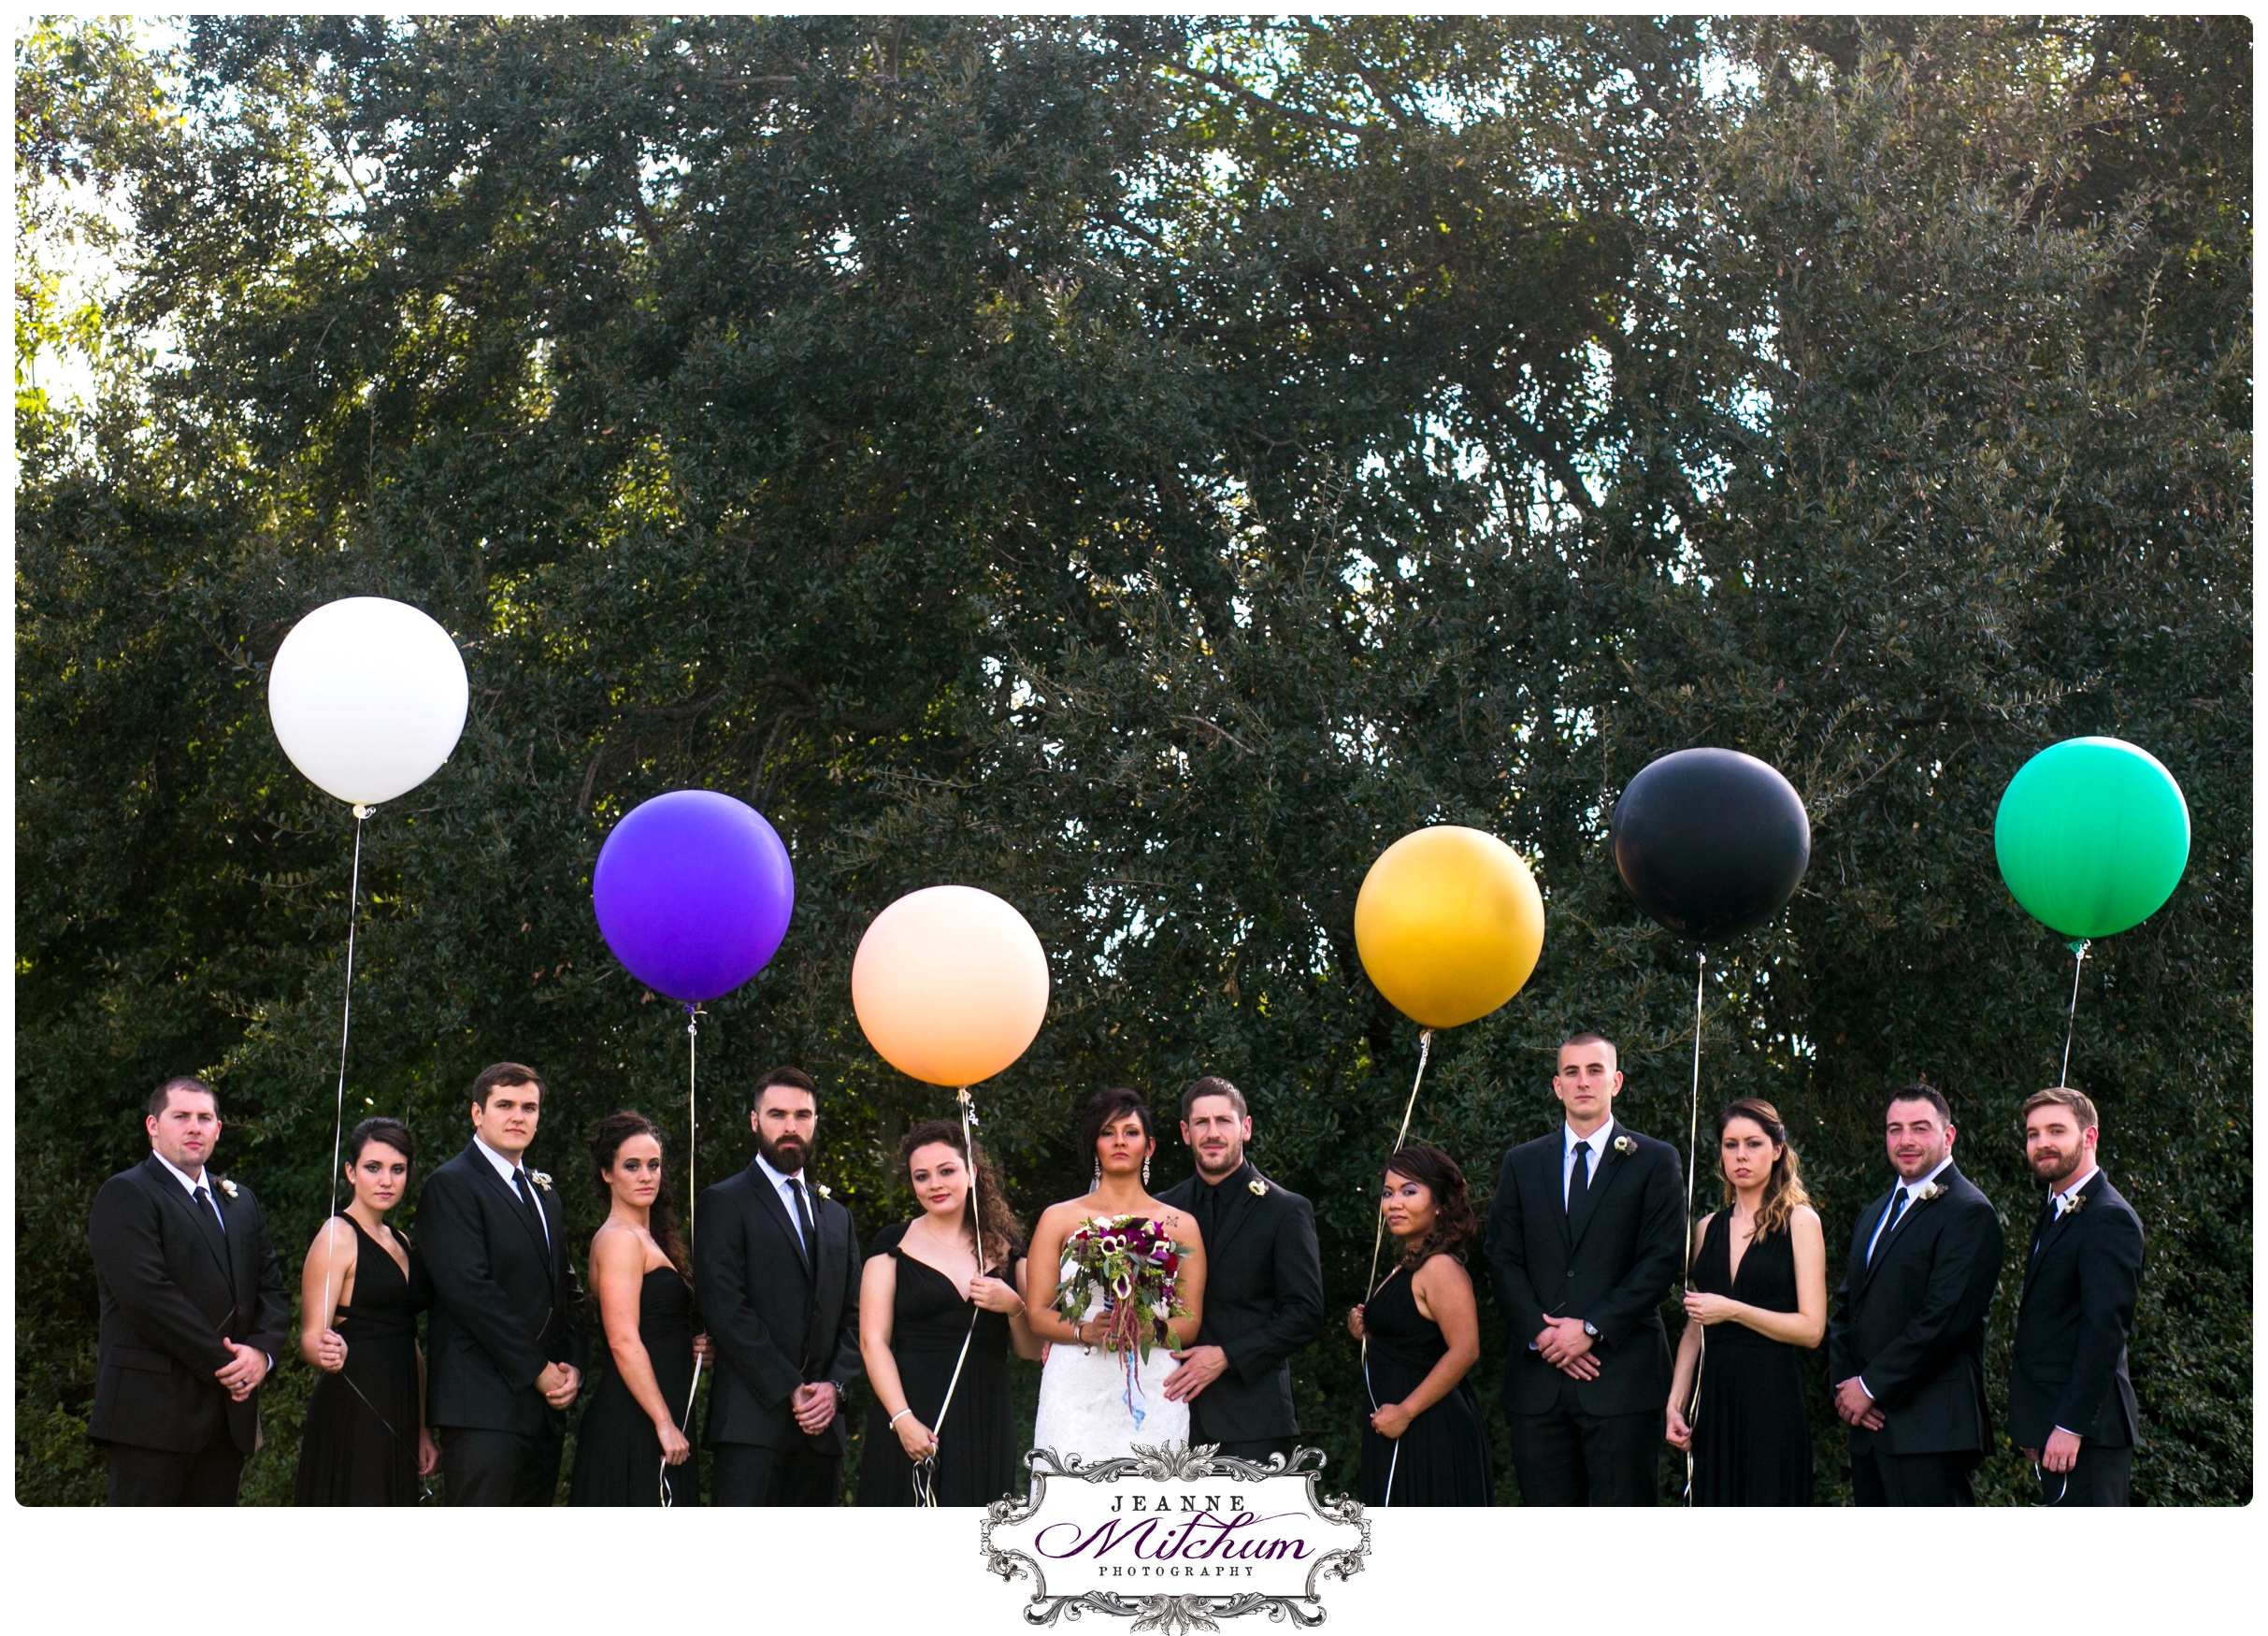 cool wedding party ideas